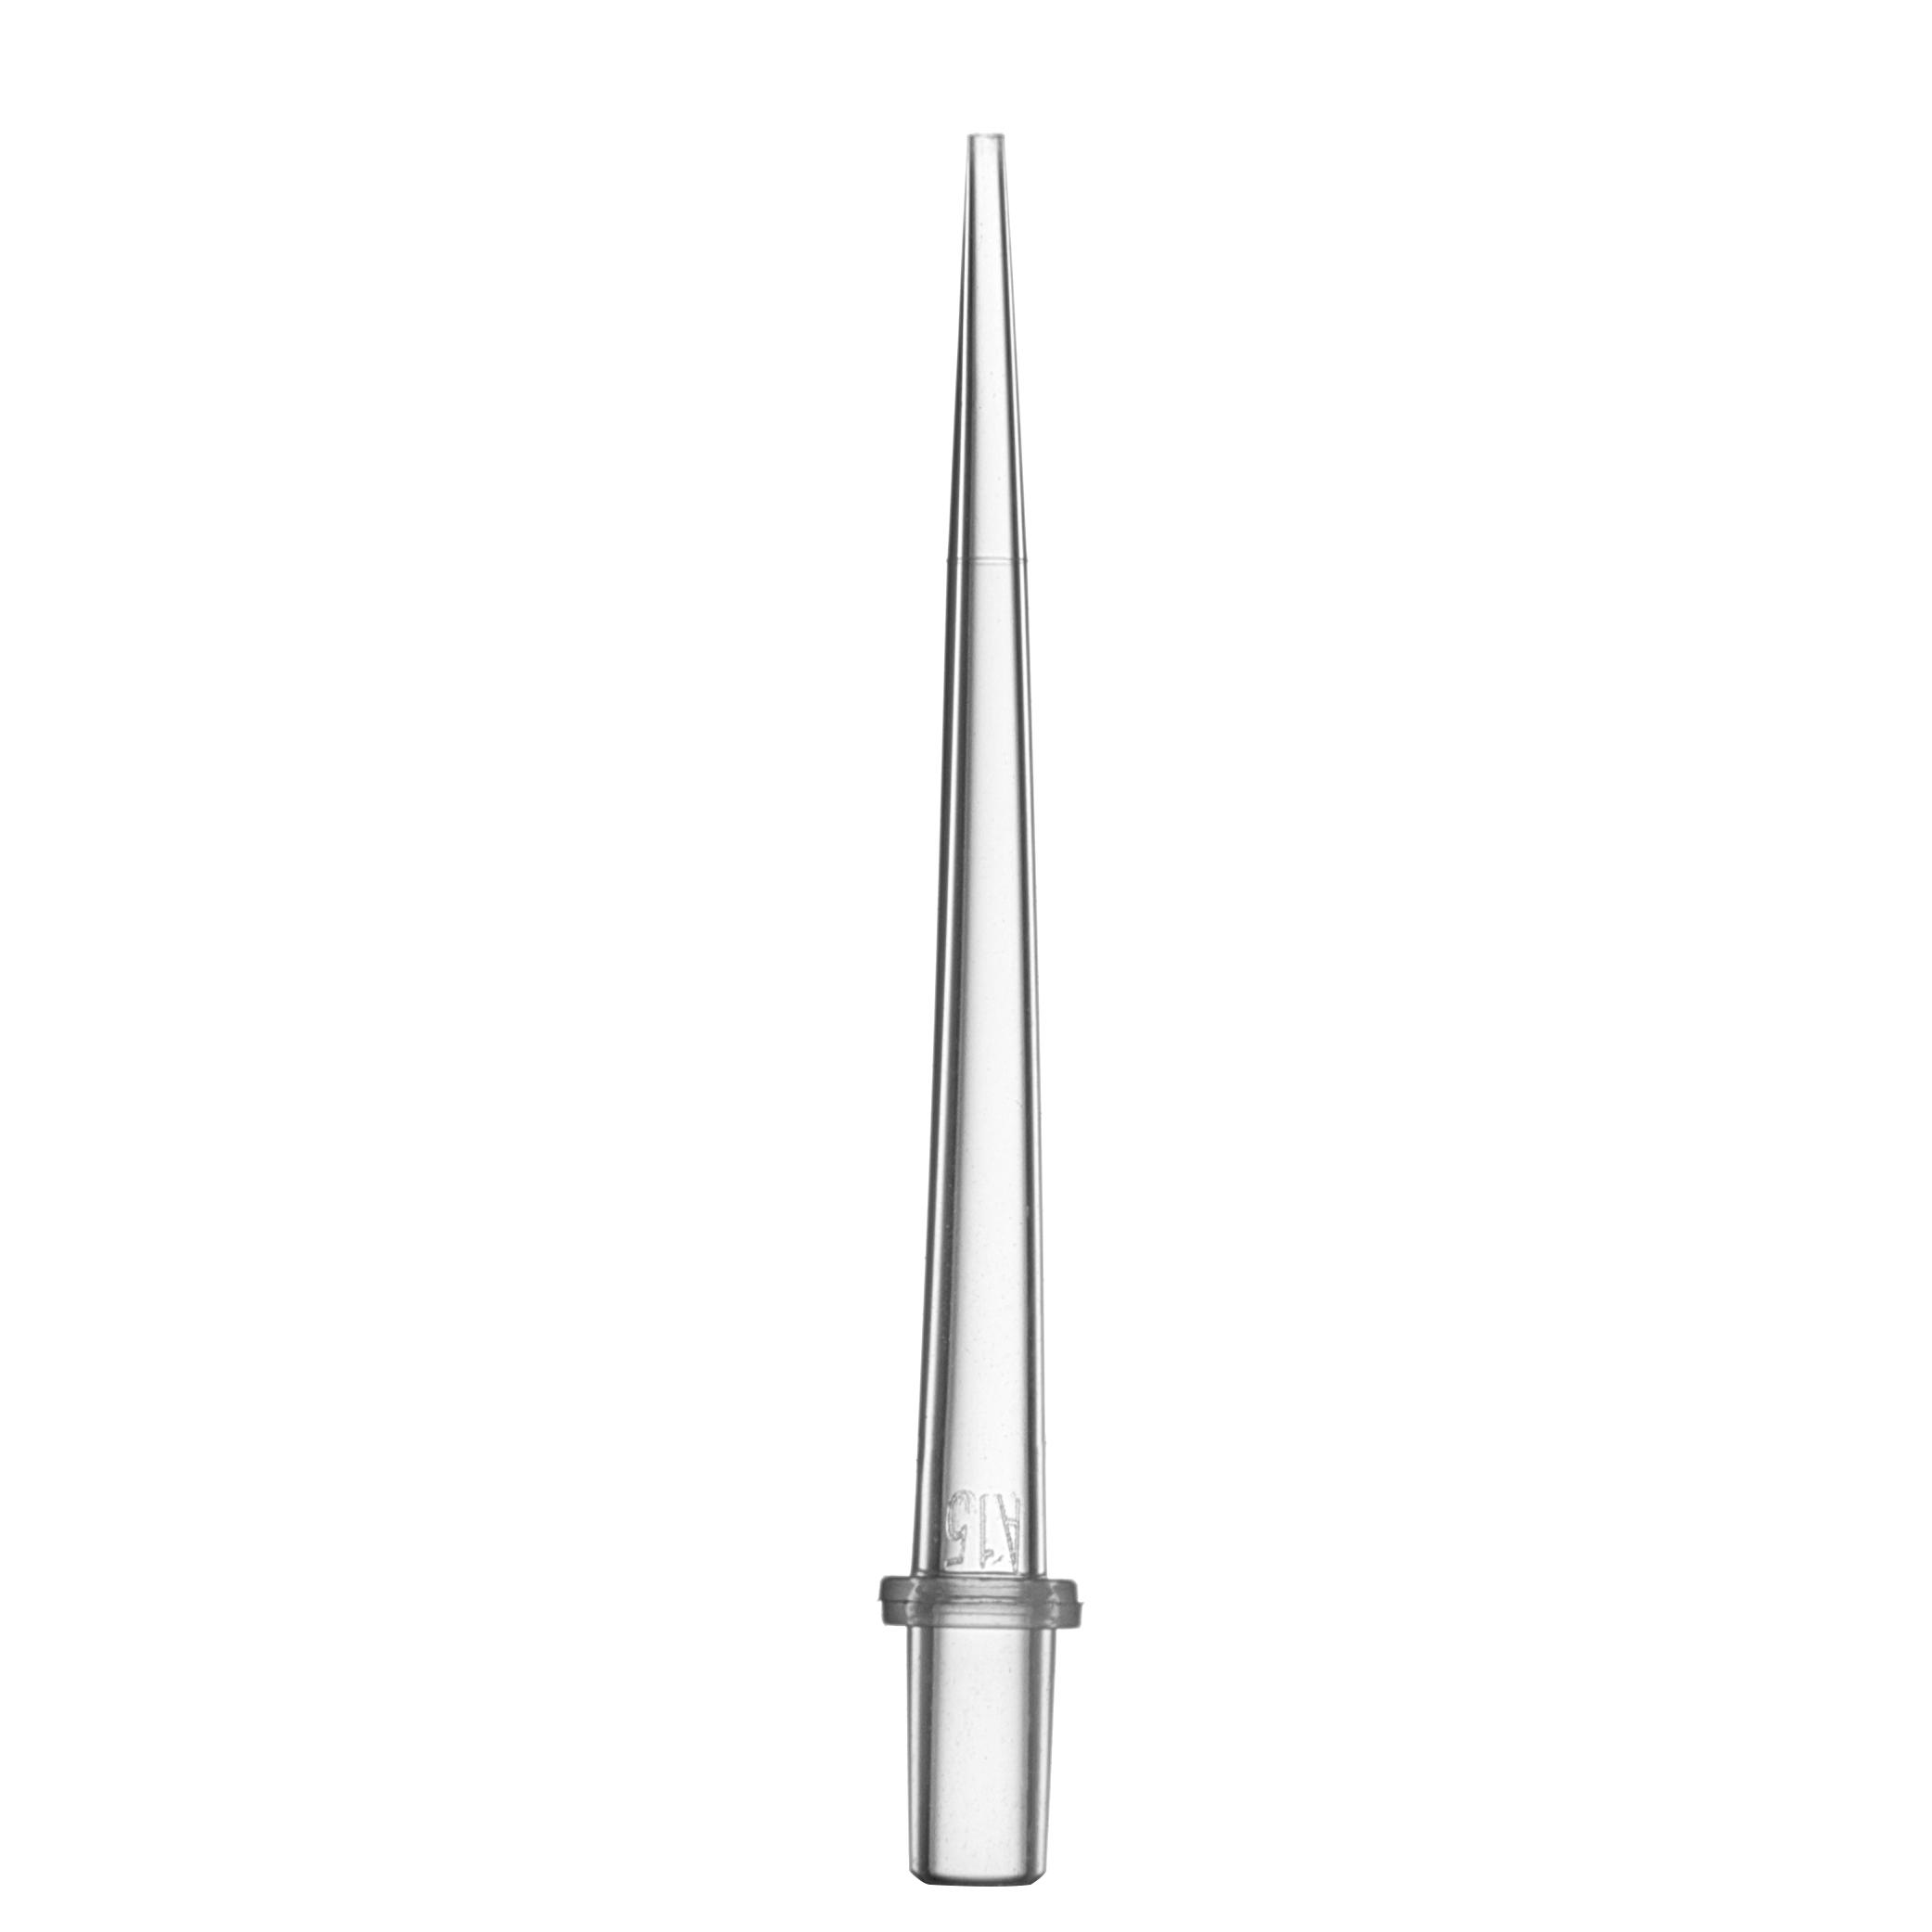 Choosing Compatible Pipette Tips